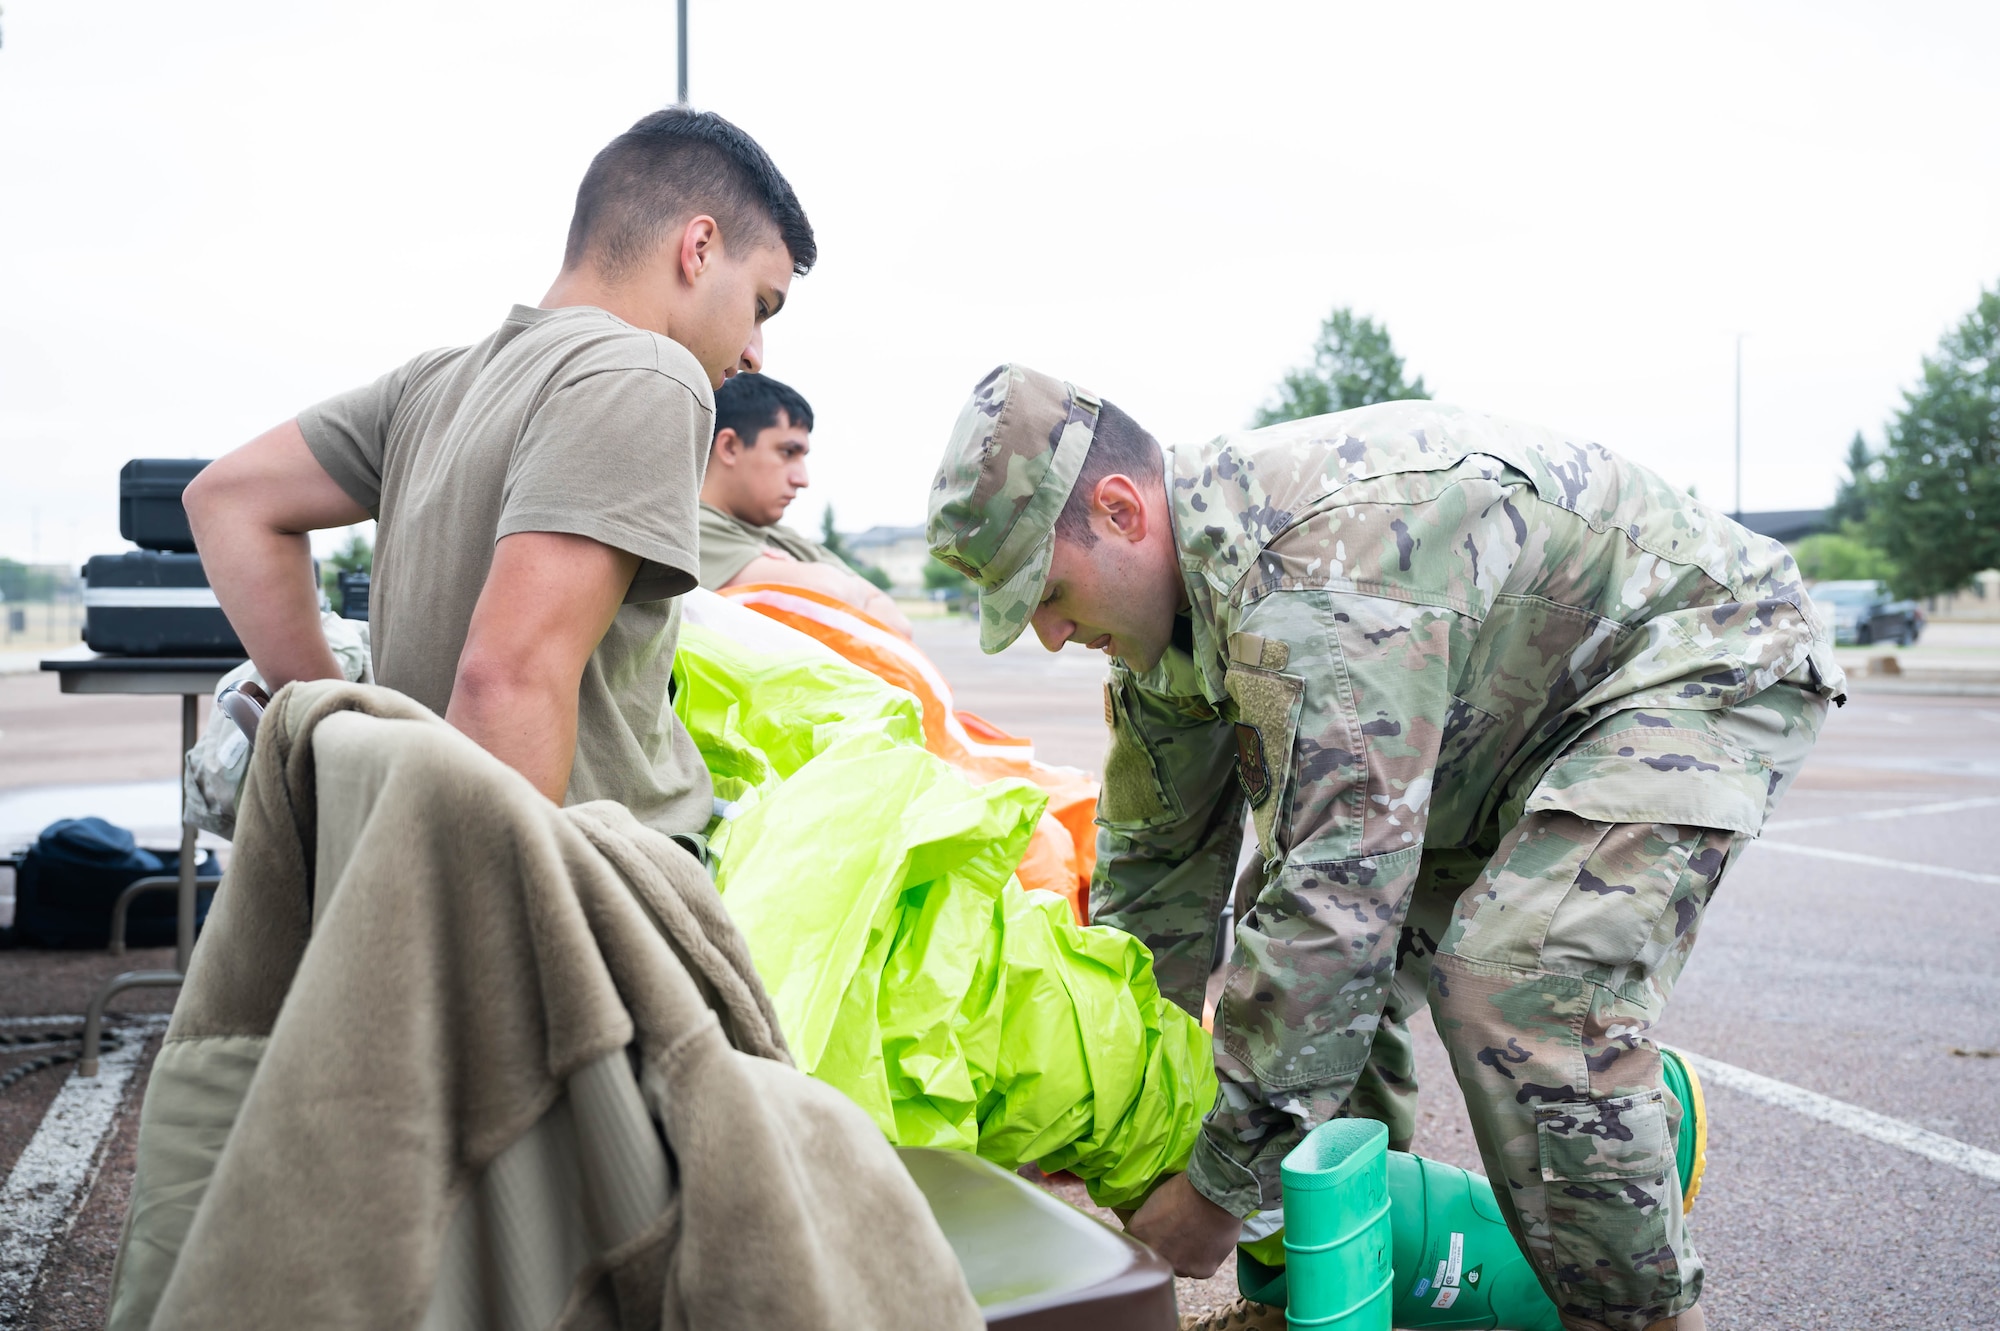 Capt. Daniel Wilkinson, right, 341st Operational Medical Readiness Squadron bioenvironmental engineering flight commander, helps Airman 1st Class Dylan Baggett, left, 341st OMRS bioenvironmental engineer apprentice, don a Level A fully encapsulating suit during a medical readiness exercise Aug. 20, 2021, at Malmstrom Air Force Base, Mont.